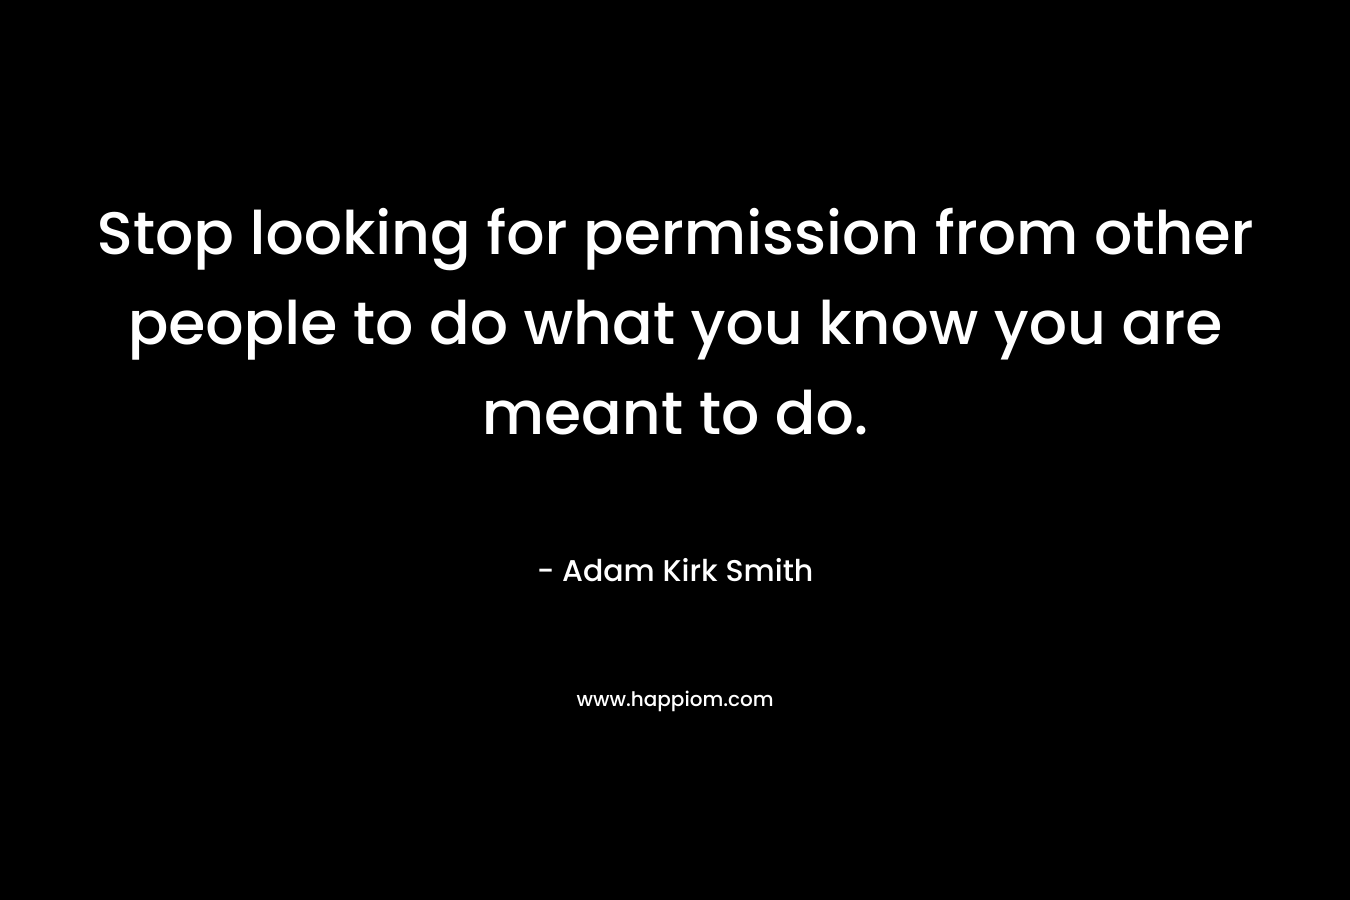 Stop looking for permission from other people to do what you know you are meant to do. – Adam Kirk Smith